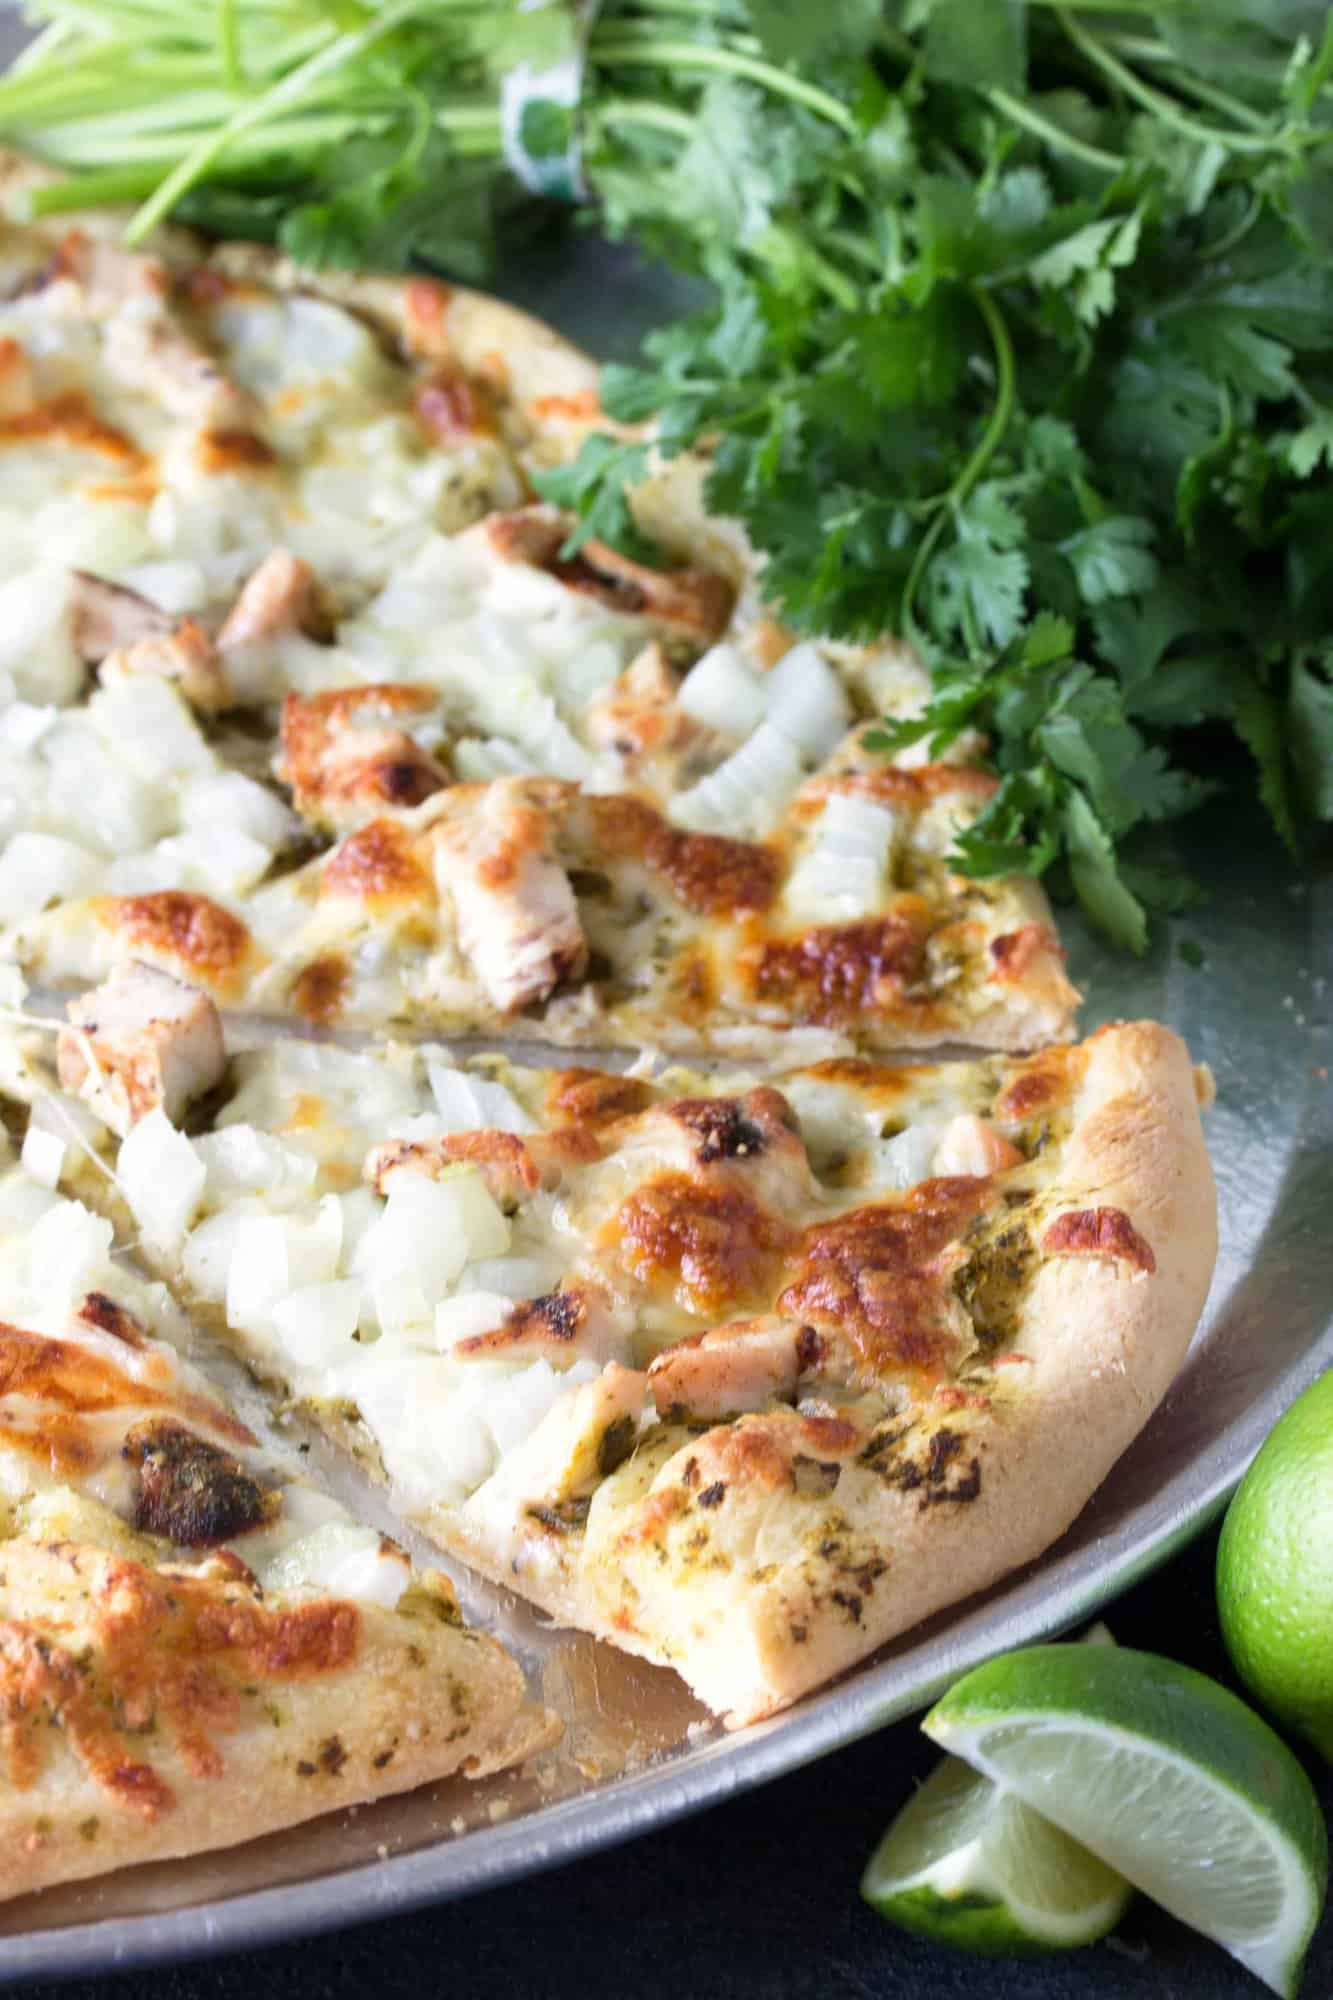 Cilantro Lime Chicken Pizza will have all cilantro lime lovers falling in love with this simple, but tasty pizza combination.